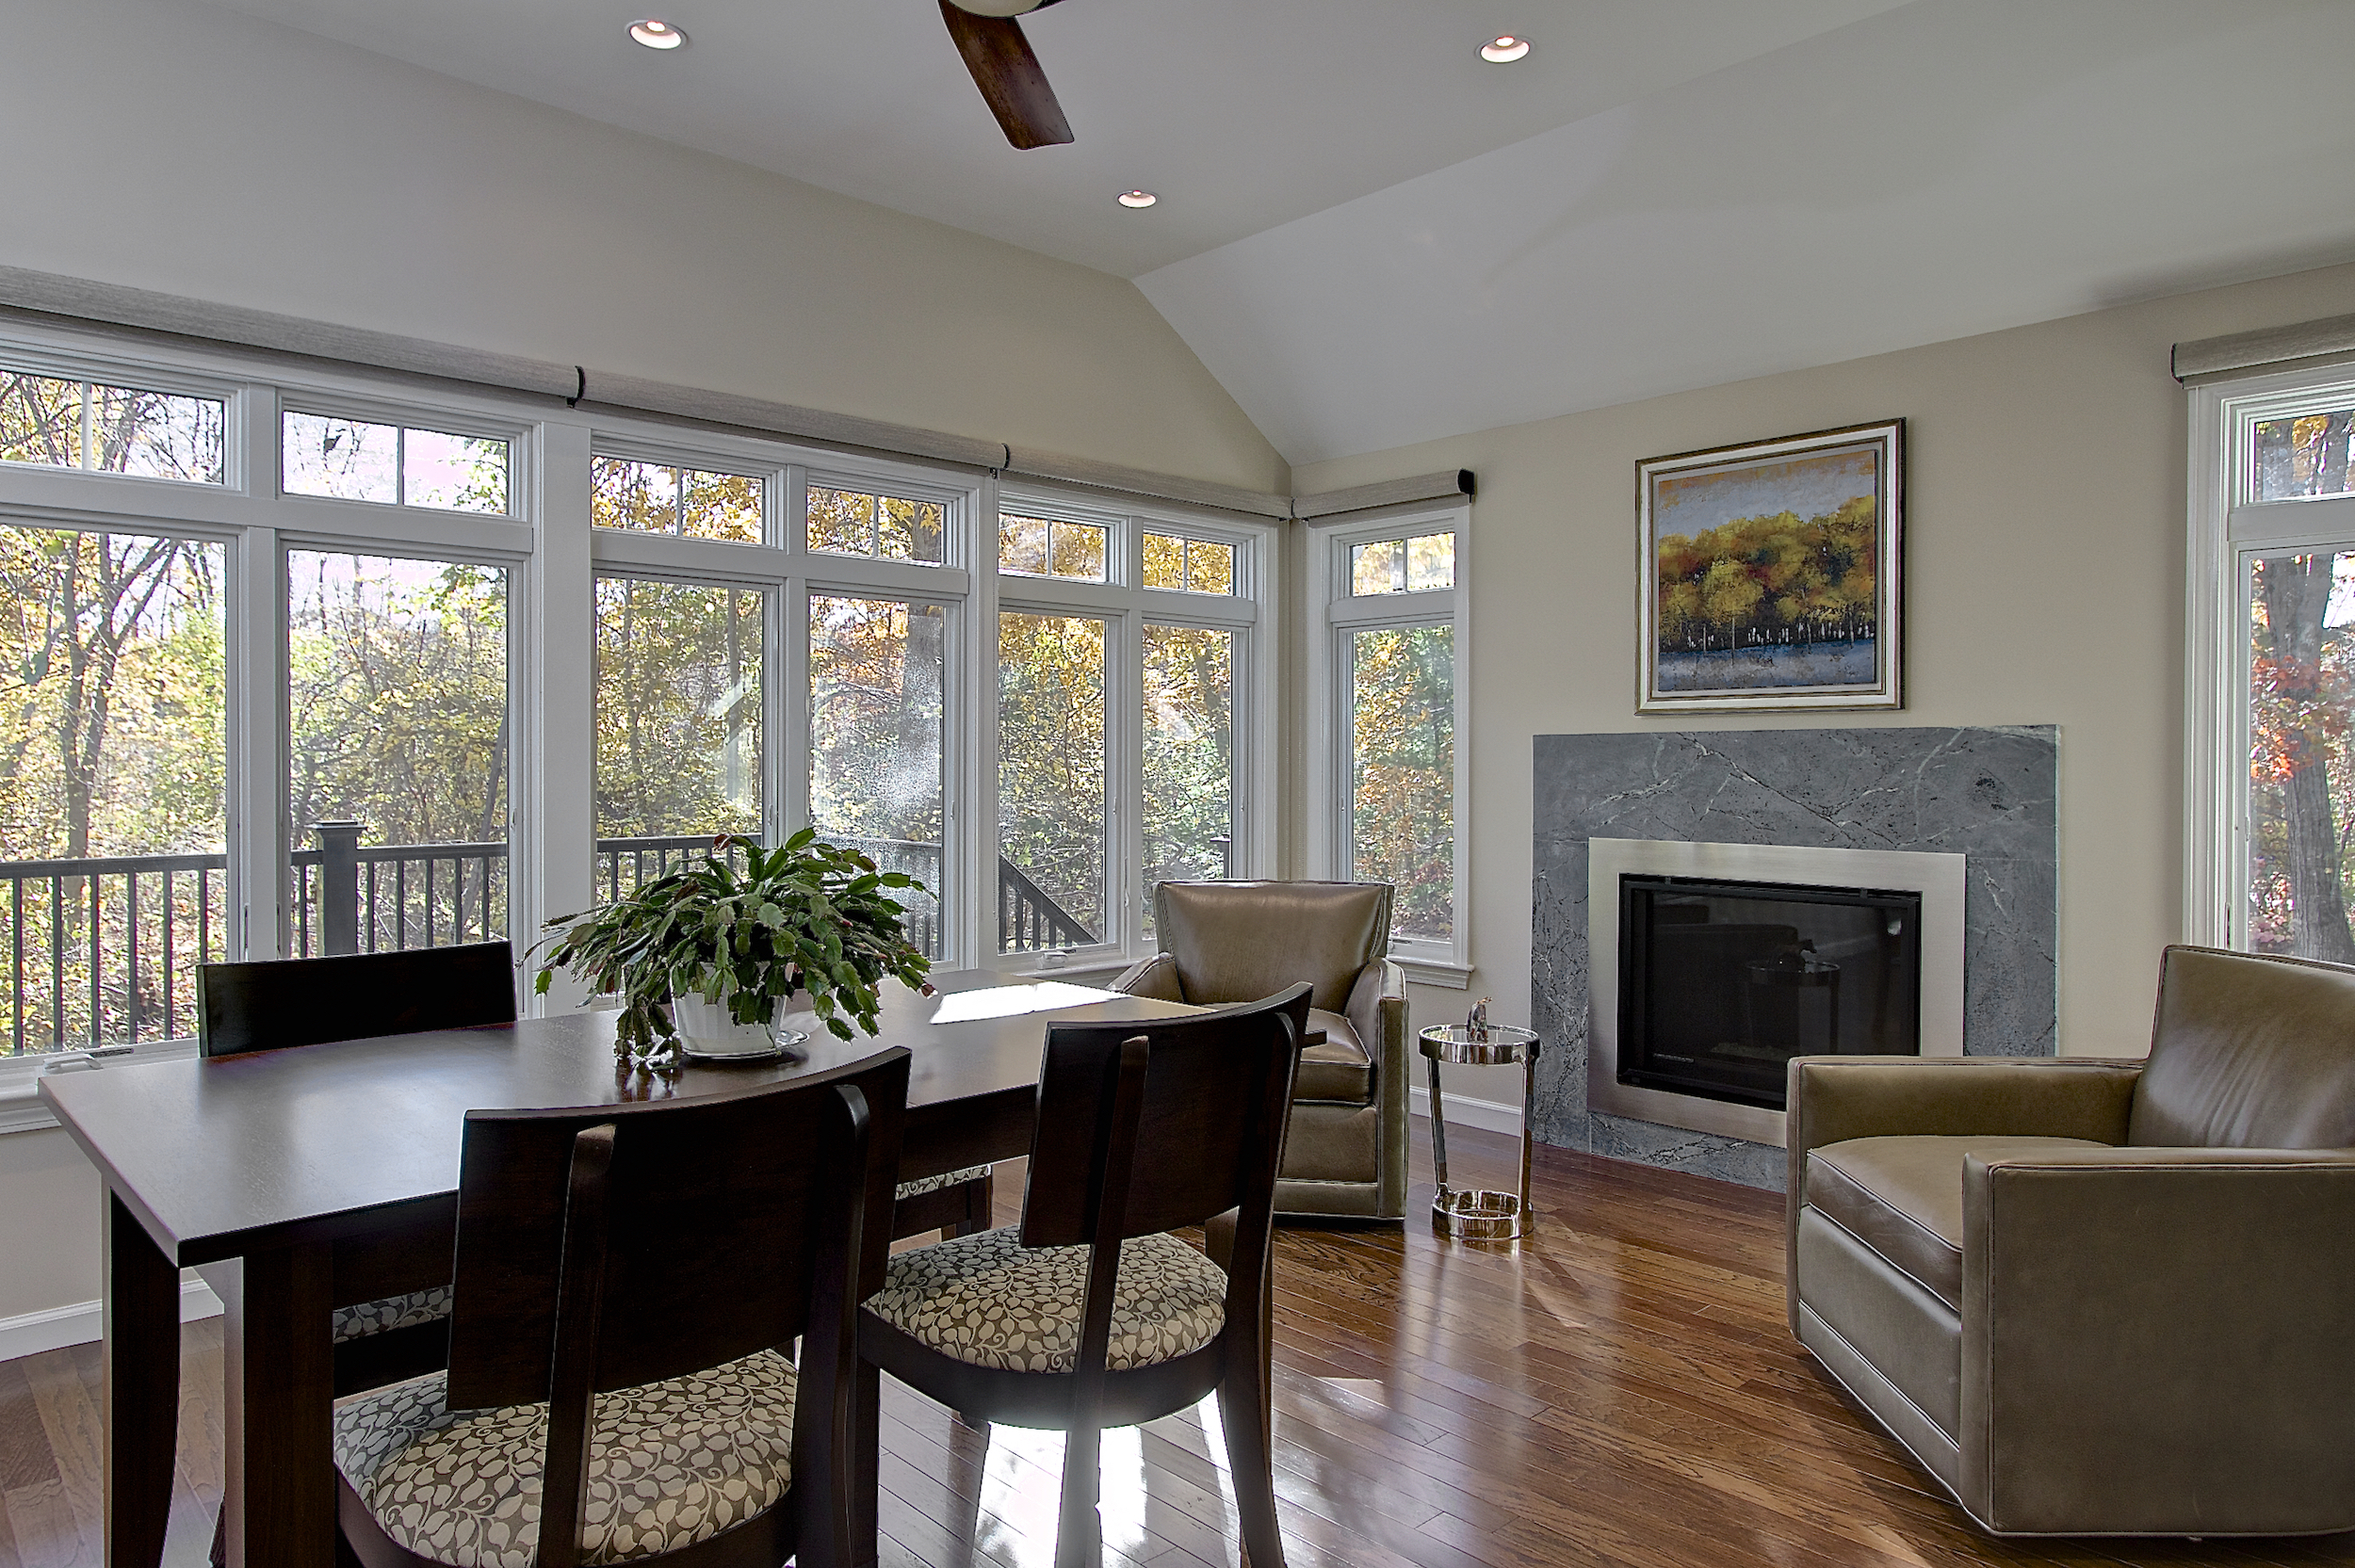 5-KitchenVisions-Other-Spaces-Sunroom-soapstone-gas-fireplace-Westwood.jpg